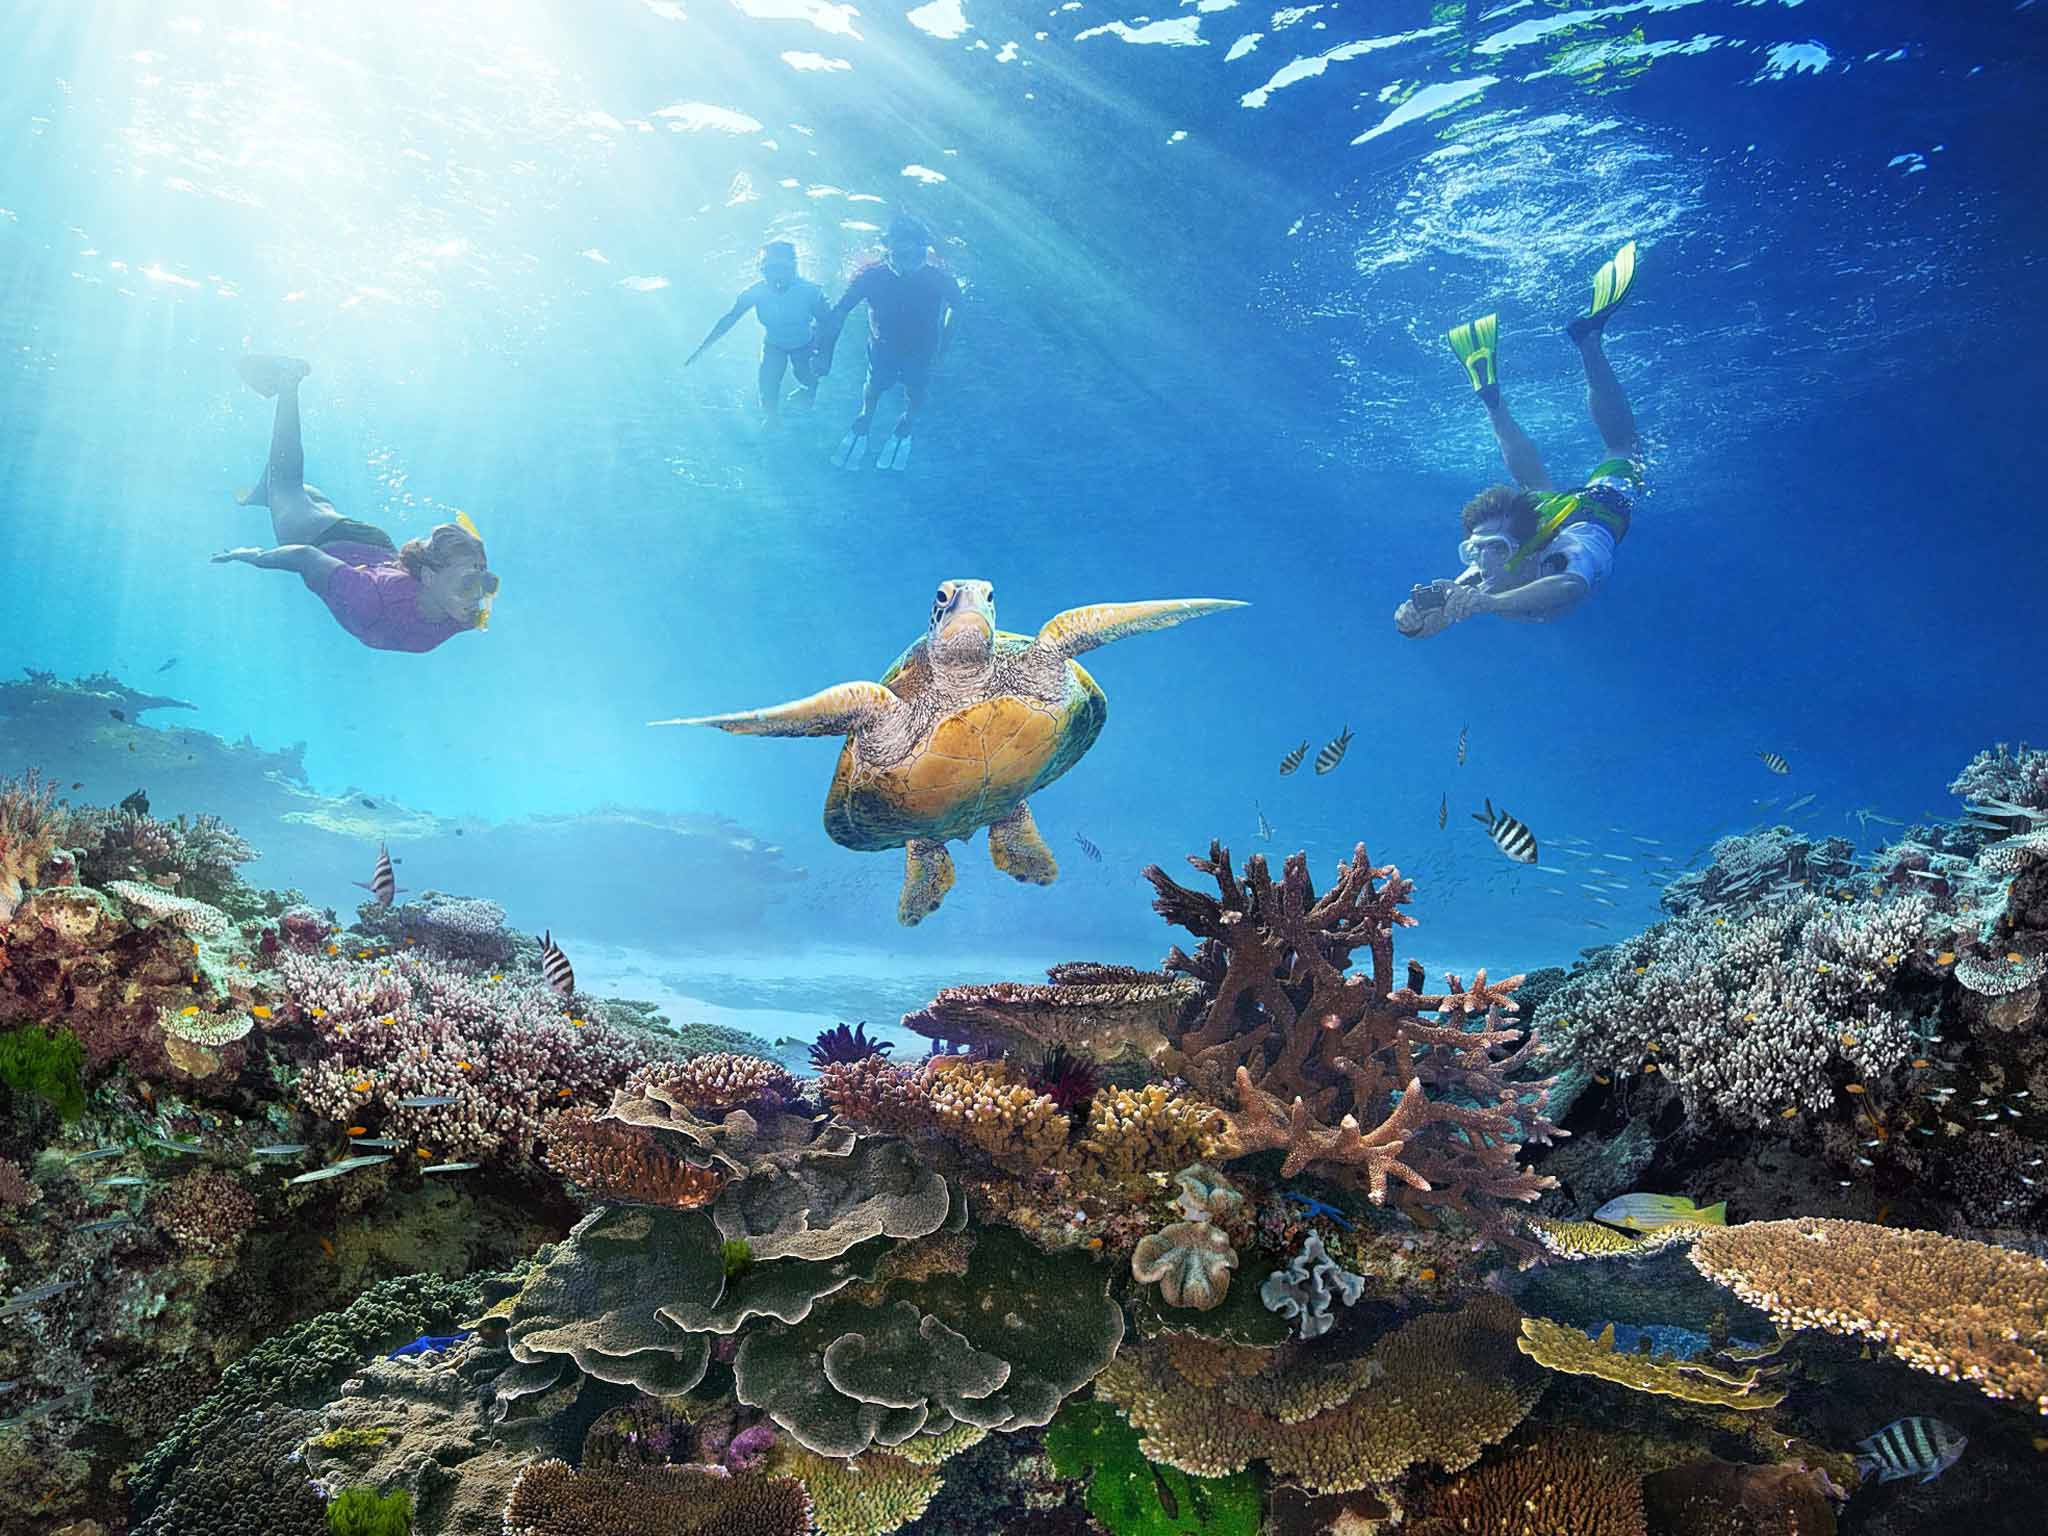 The Great Barrier Reef: David Attenborough returns to